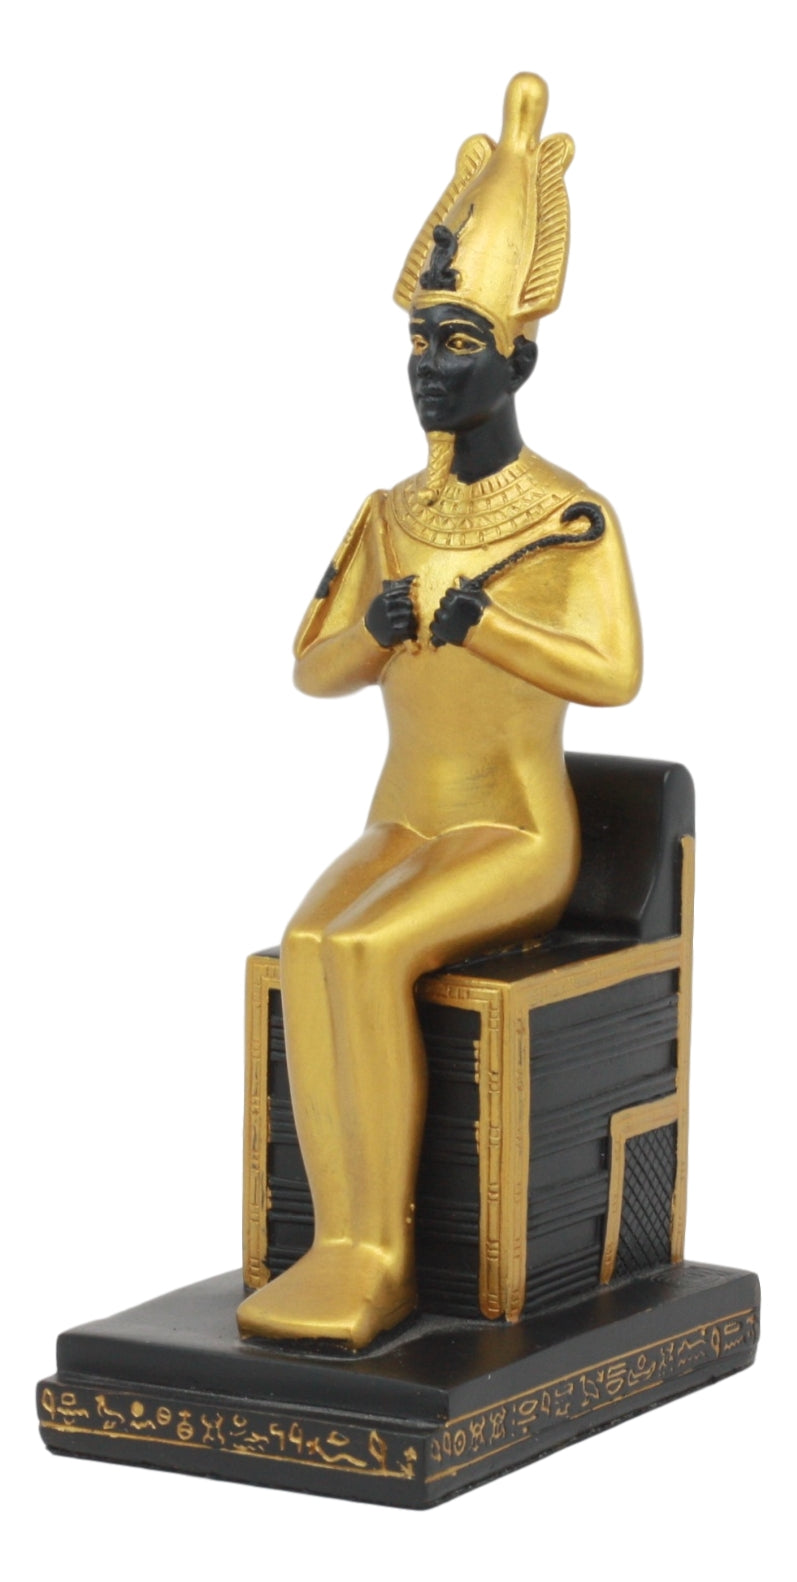 Ebros Classical Egyptian Gods and Goddesses Seated On Throne Statue Gods of Egypt Ruler of Mankind Decorative Figurine … (Osiris God of The Afterlife)